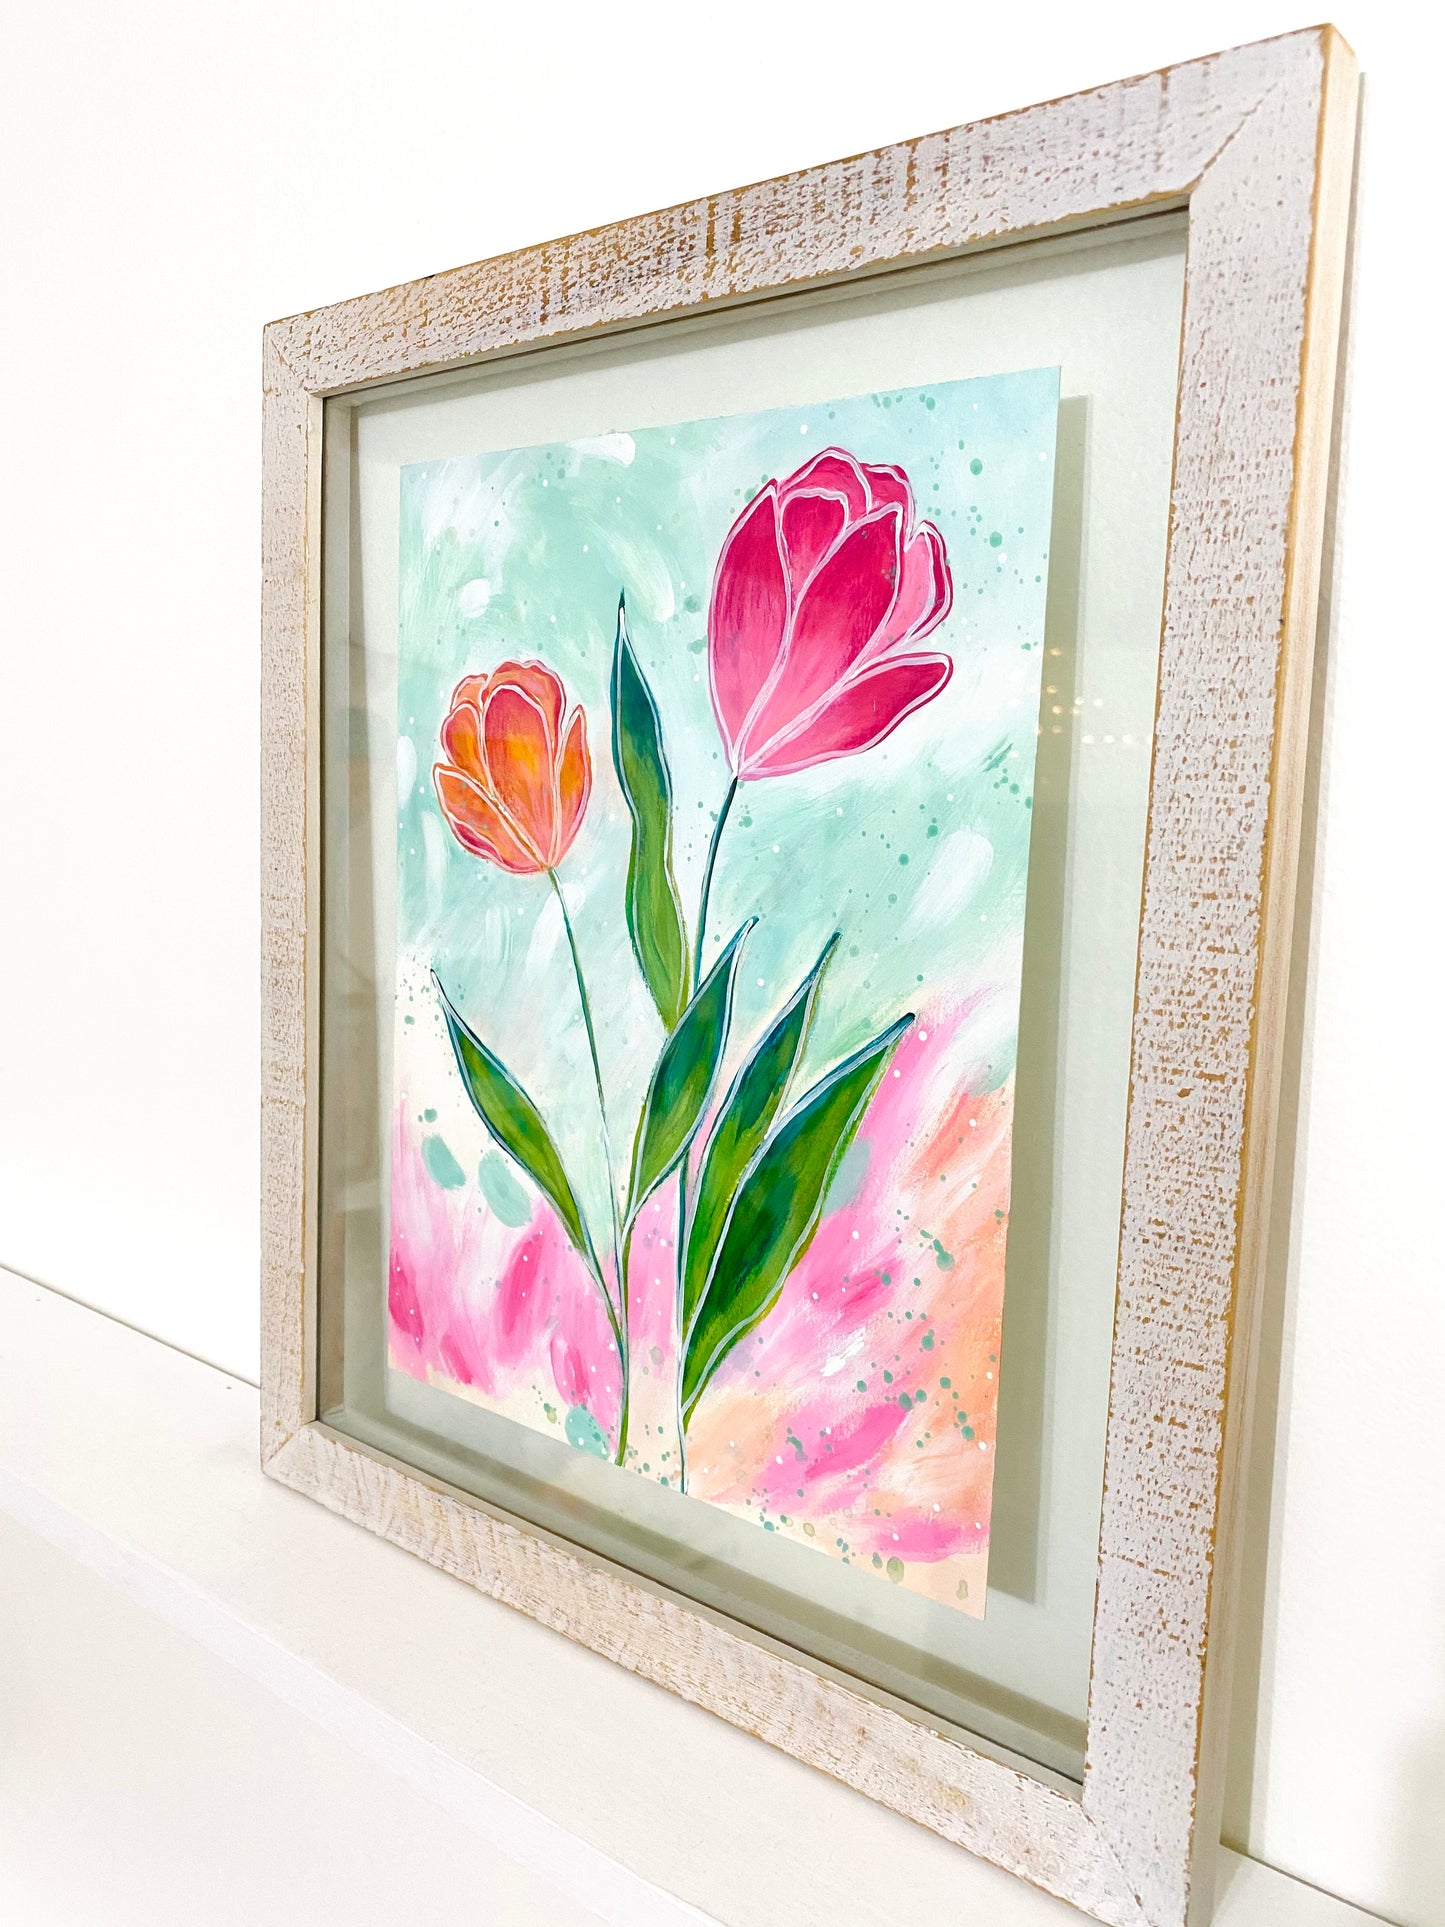 February Flowers Day 1 Tulips 8.5x11 inch original painting